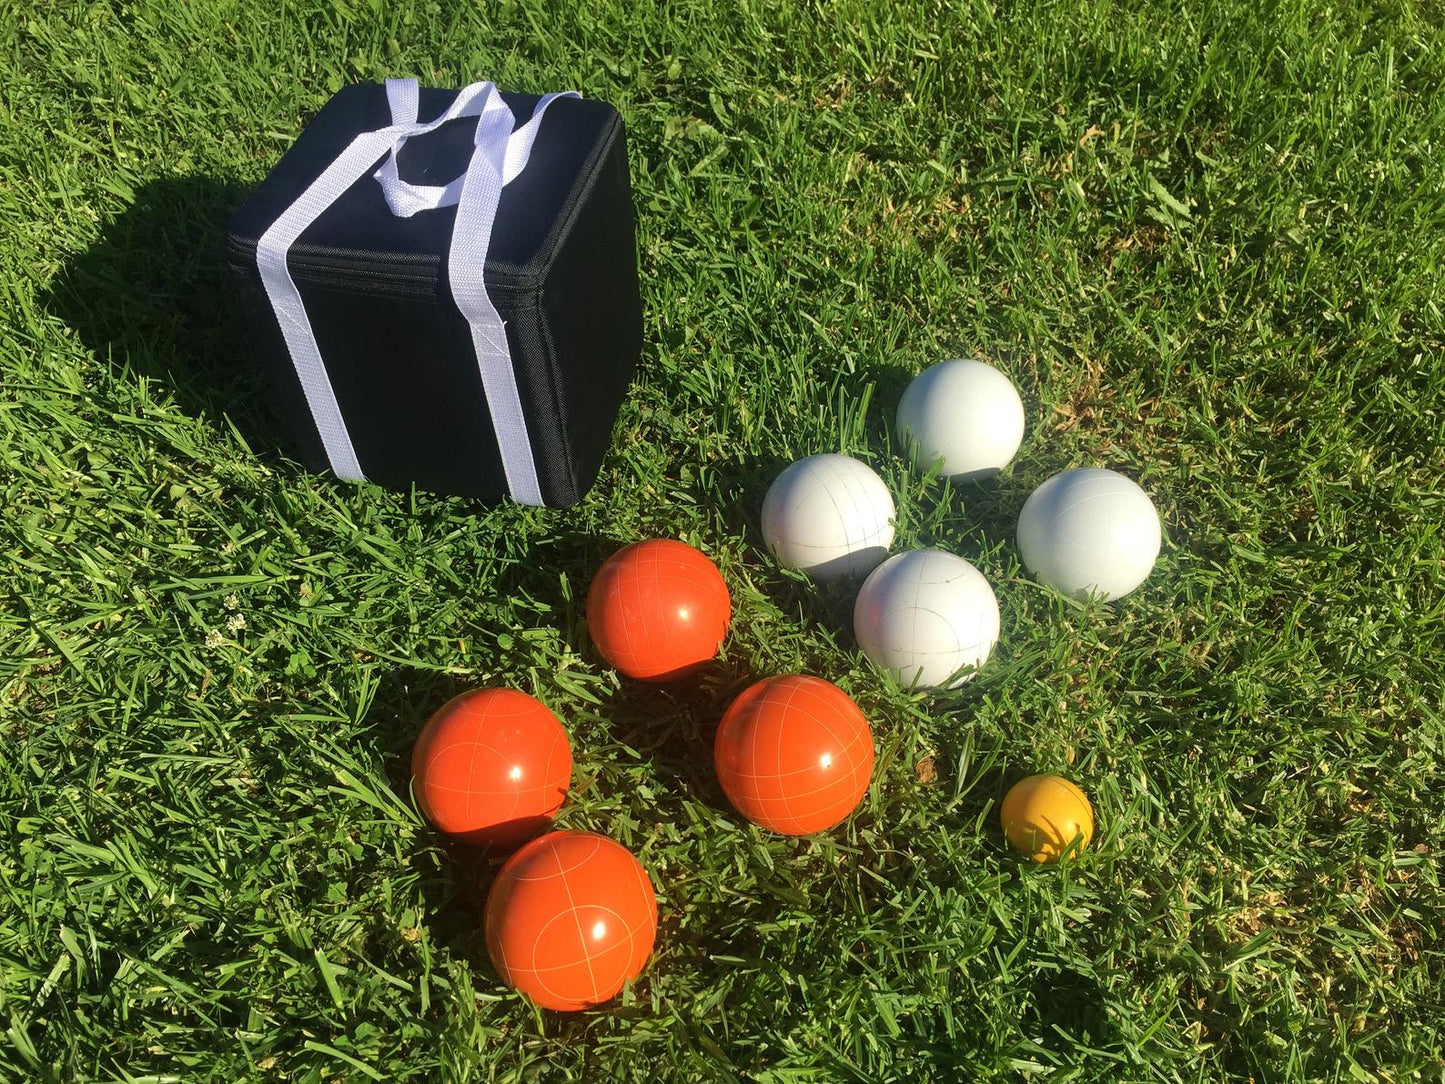 107mm with Orange and White Balls with Black Bag